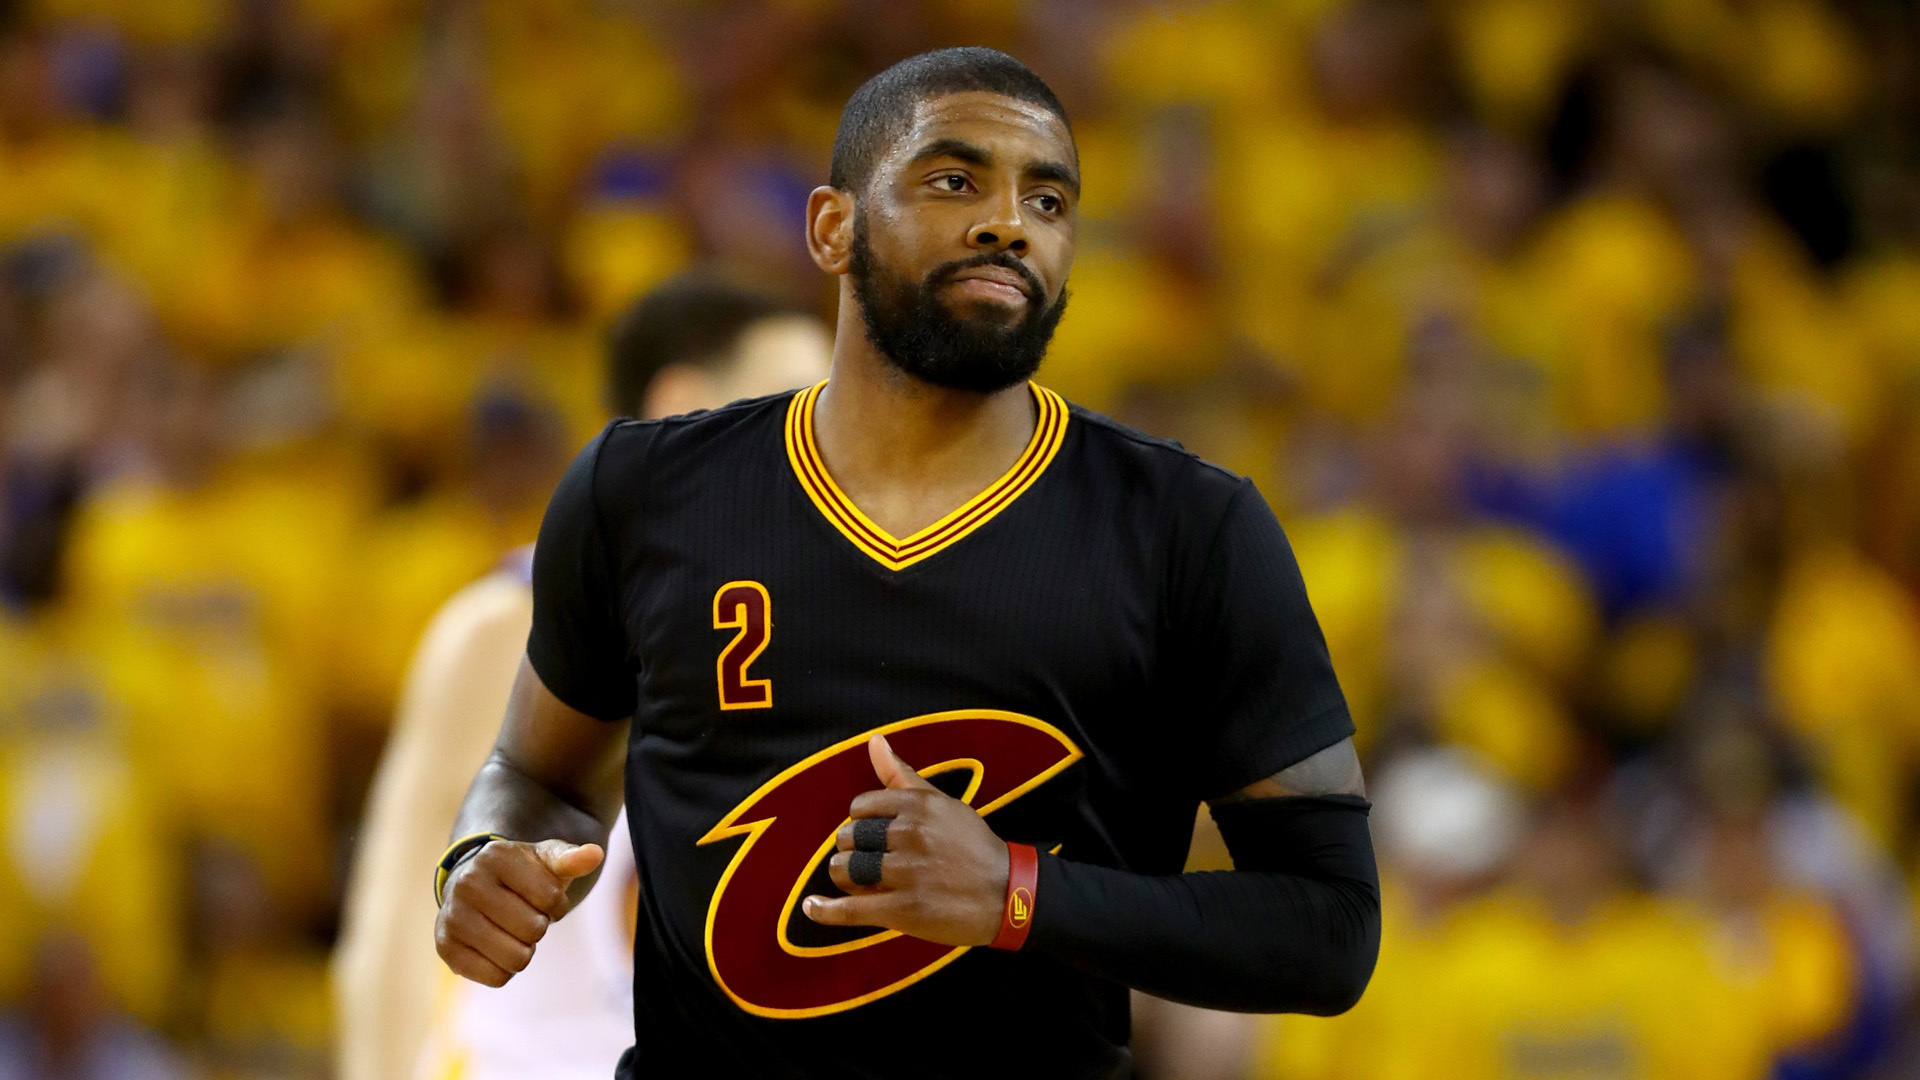 Kyrie Irving, Wallpapers images photos, Sports backgrounds, Athlete, 1920x1080 Full HD Desktop